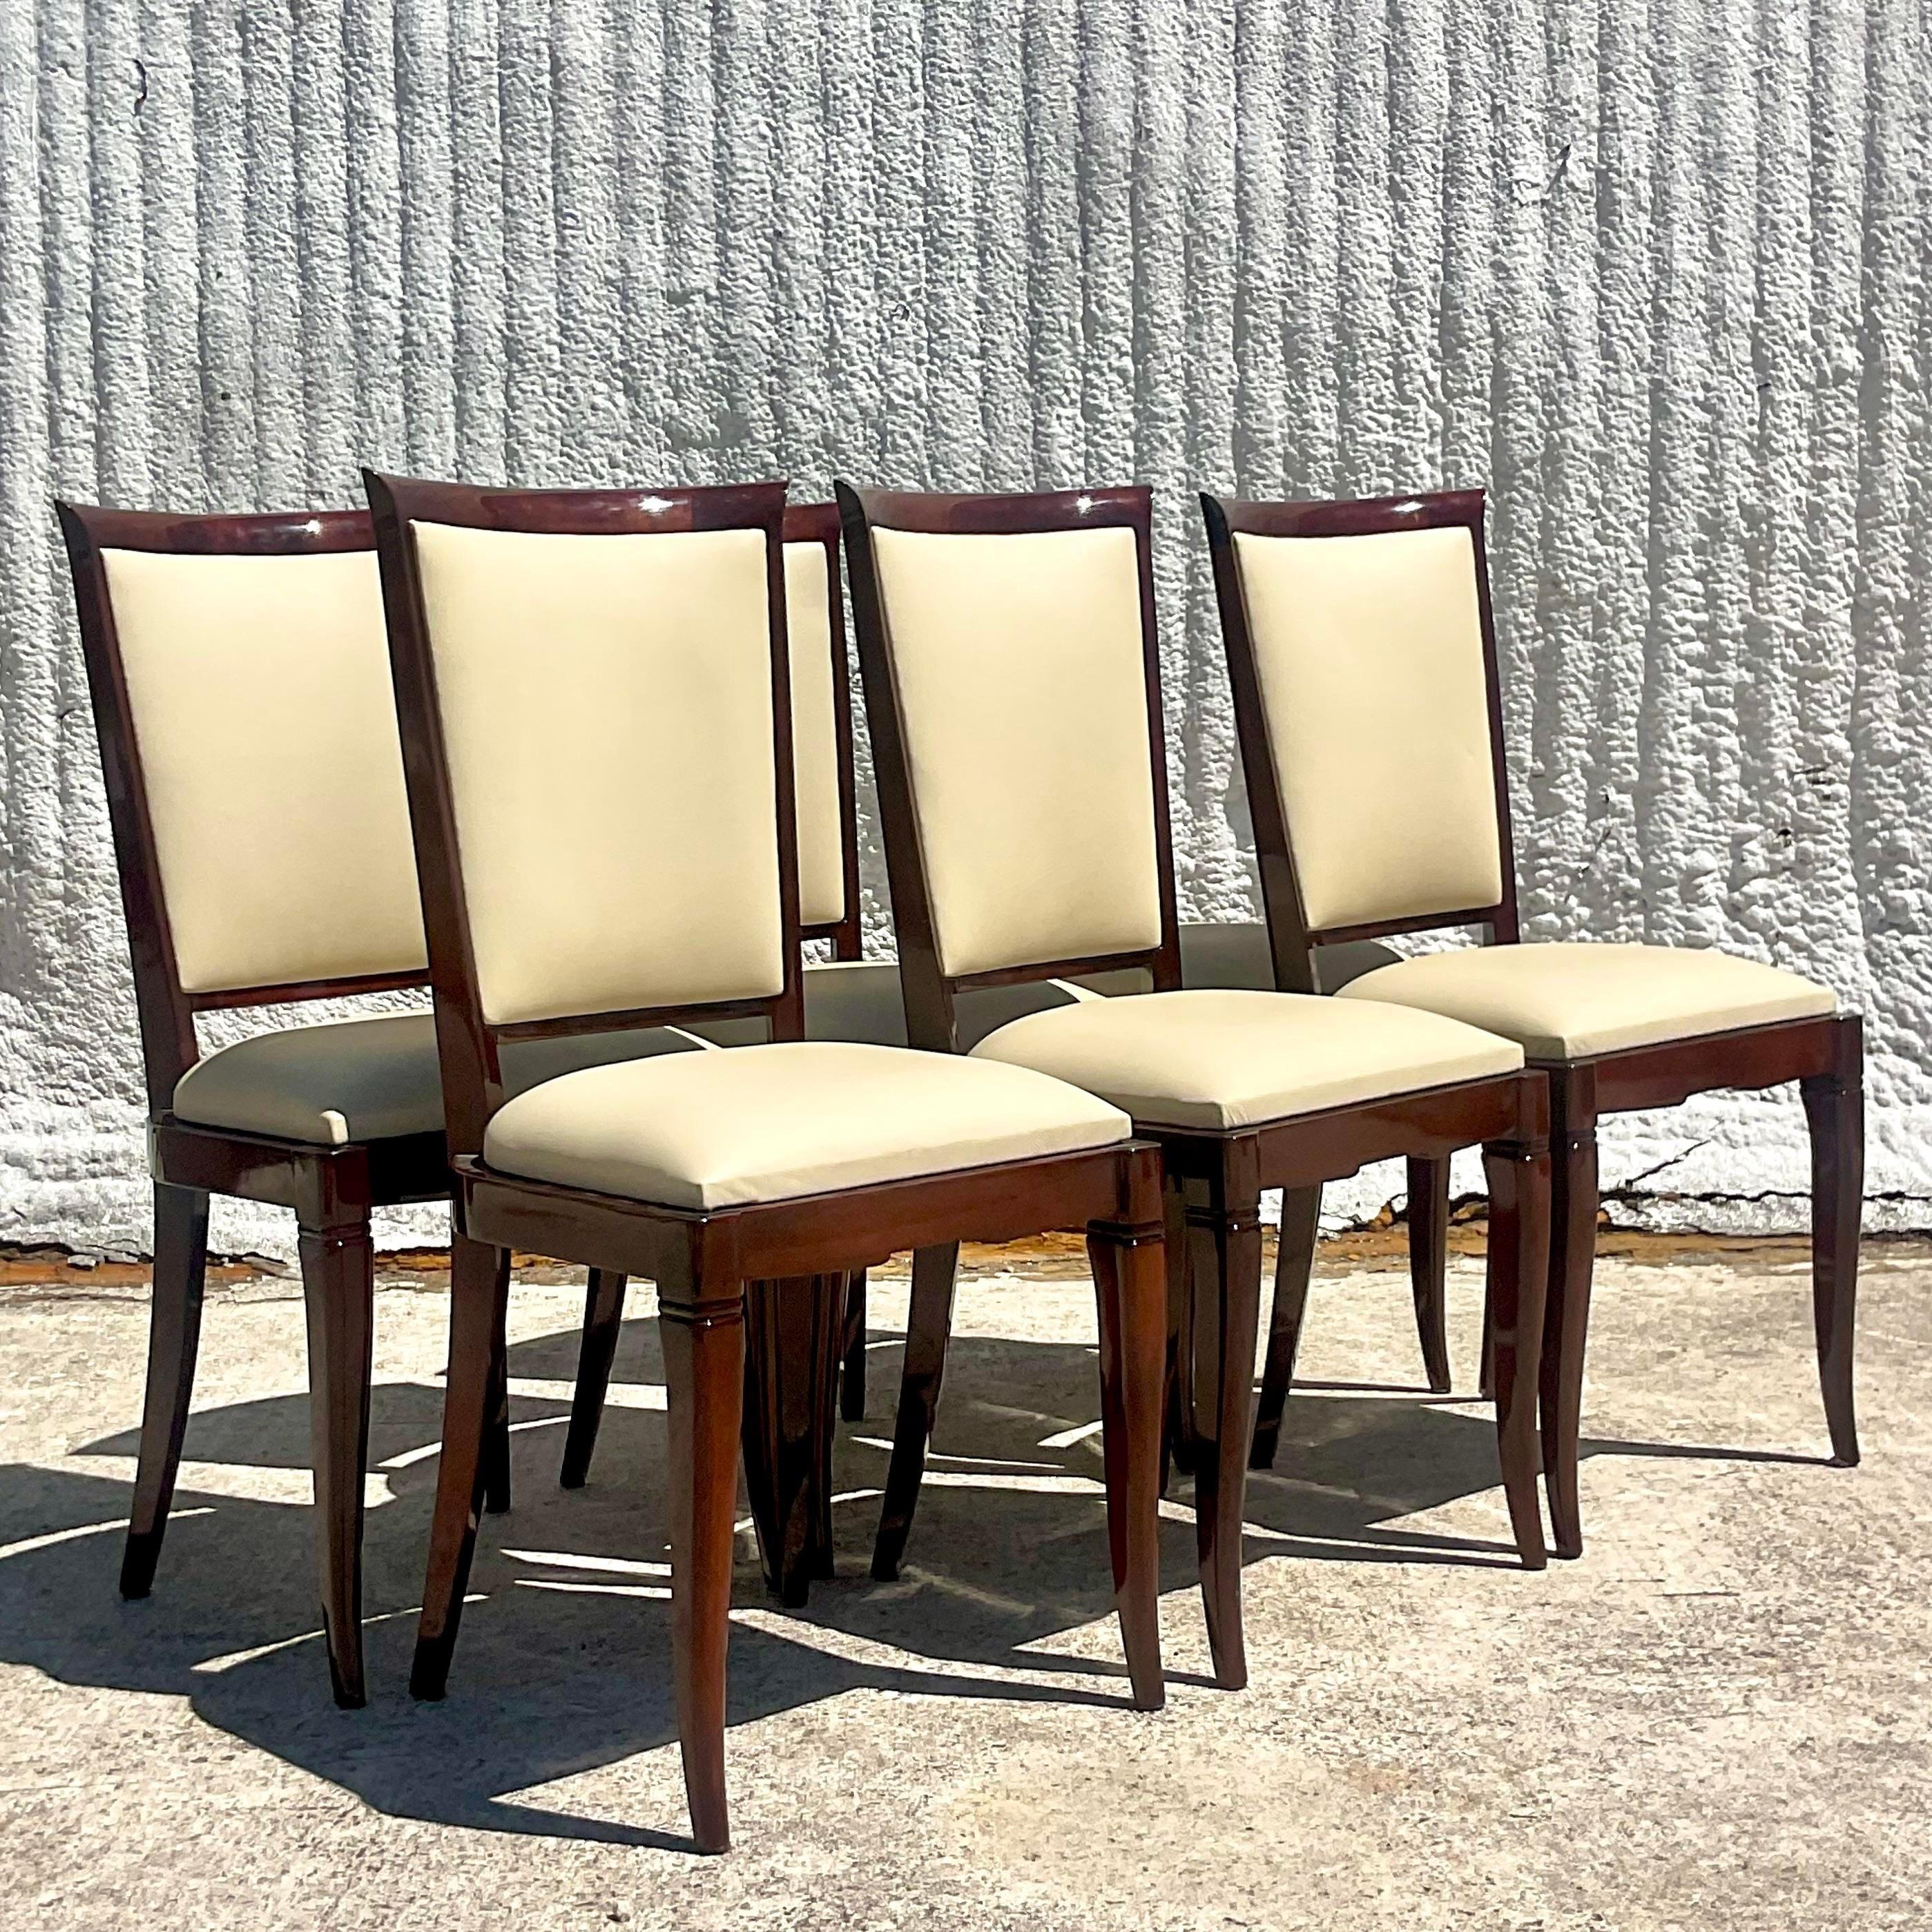 An extraordinary set of six vintage Art Deco dining chairs. Beautiful slender frame with a full wood back and cabriolet legs. Gorgeous smooth leather in a chic off white. Fully restored with a high gloss sheen. Acquired from a Palm Beach estate.